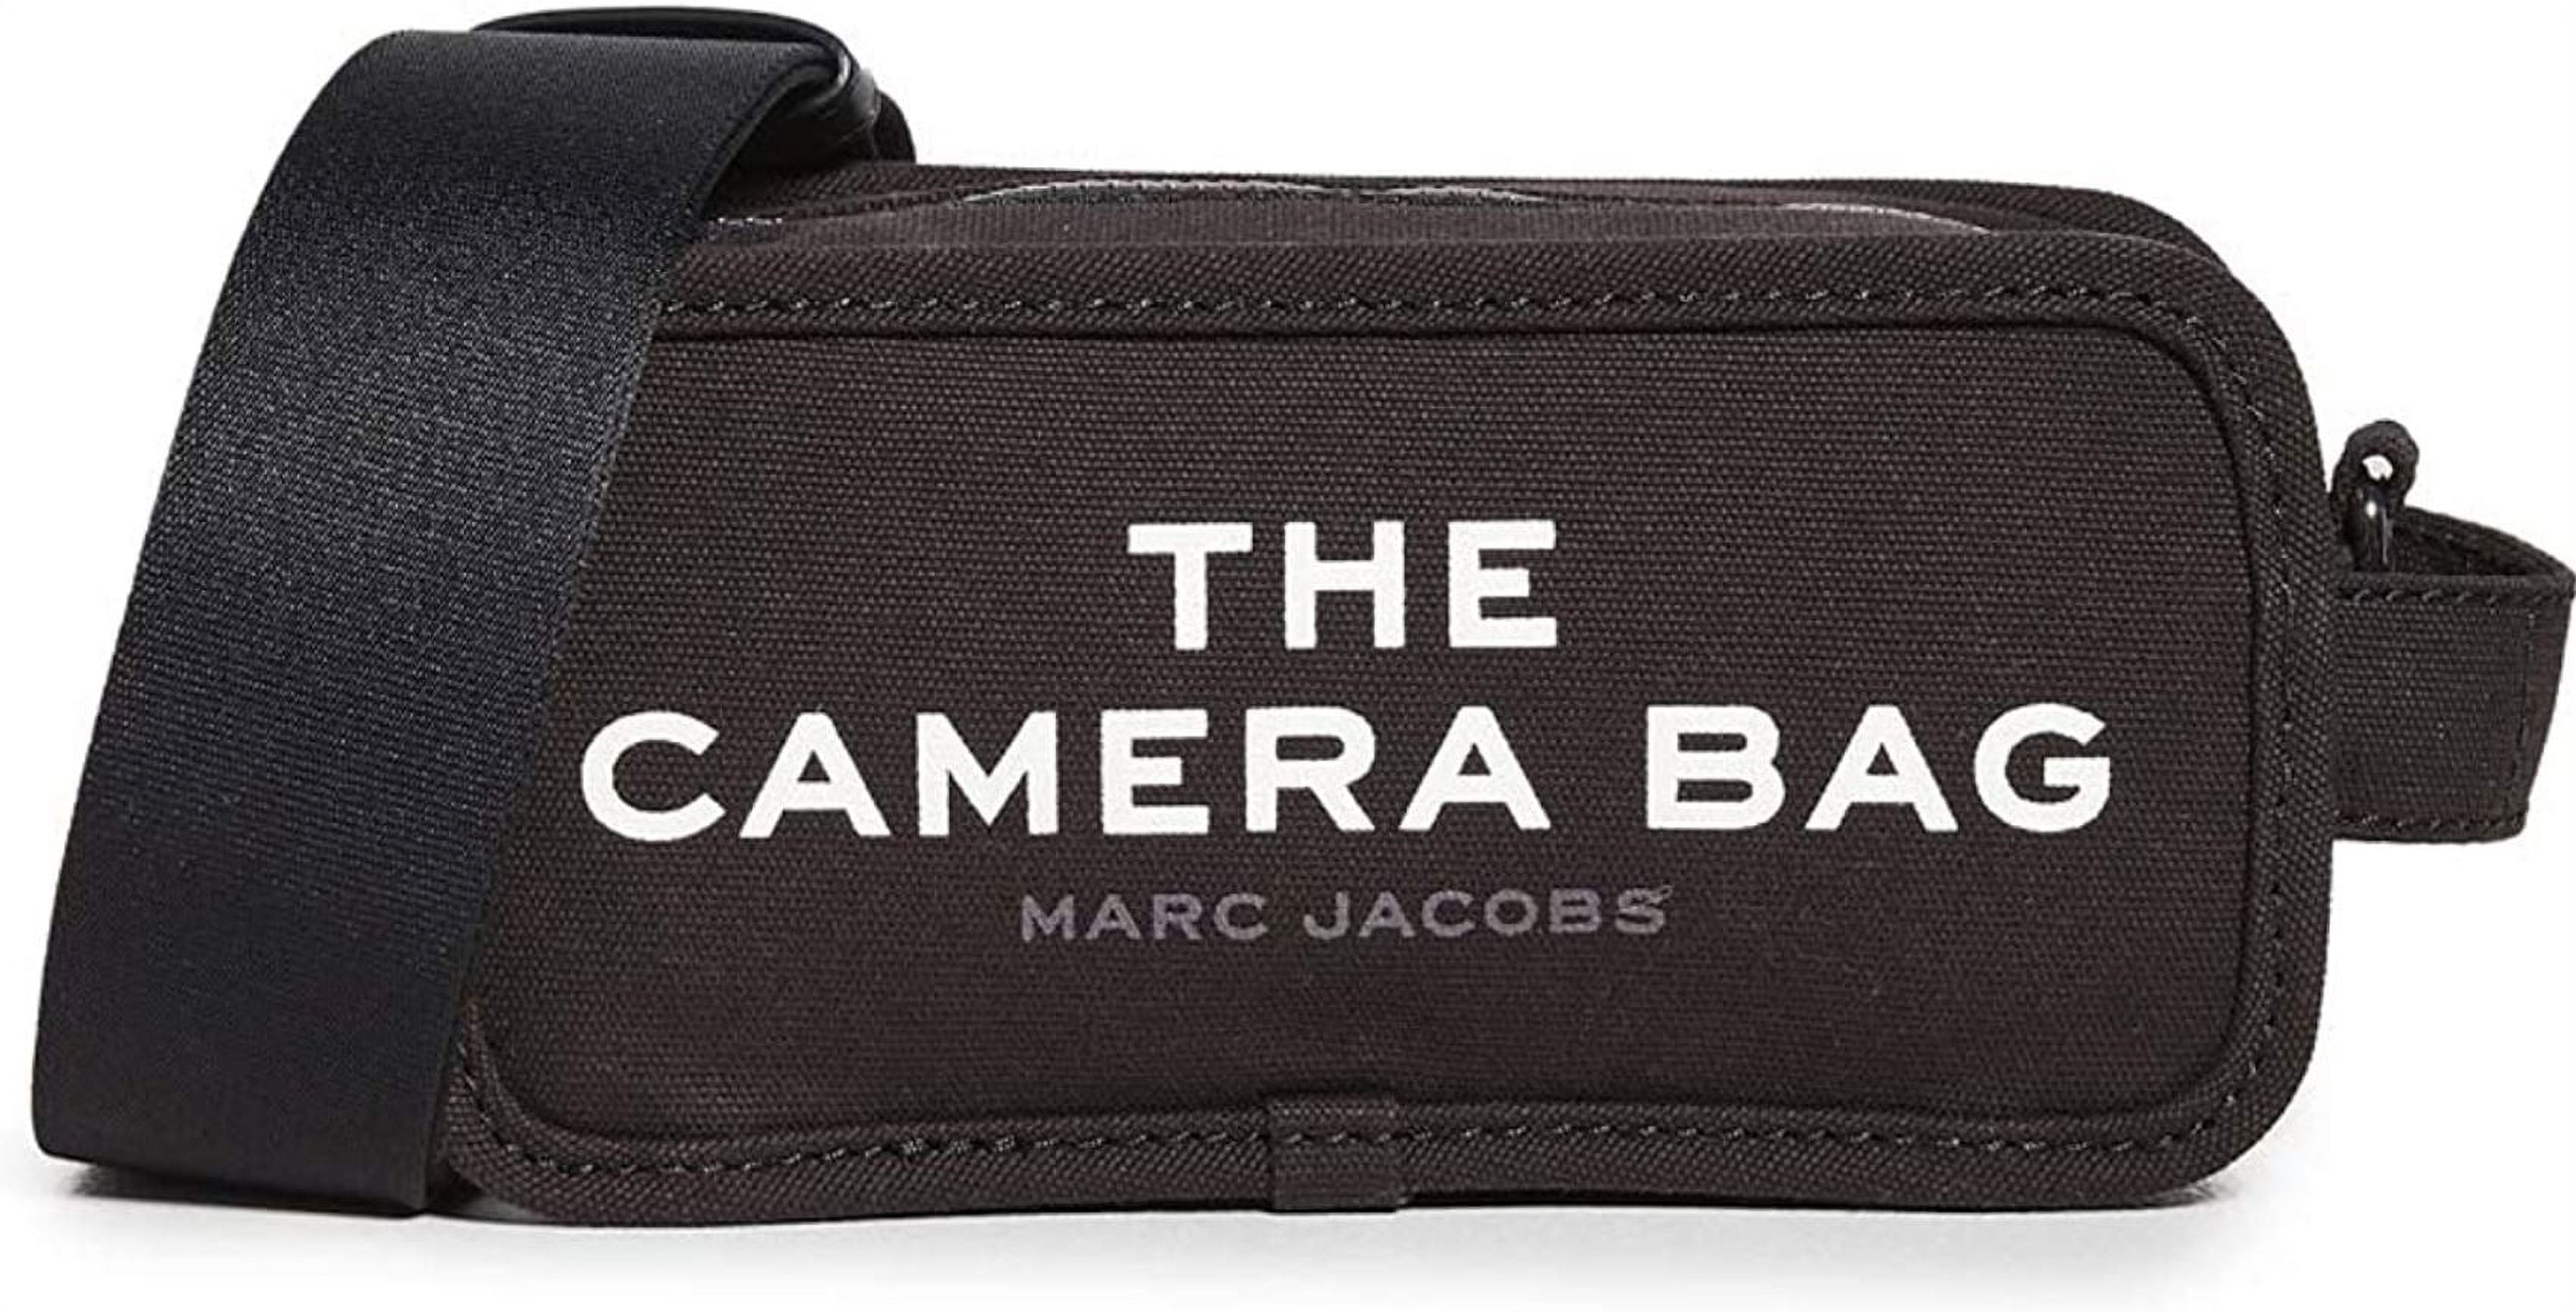 MARC JACOBS: The Camera bag in canvas - Black